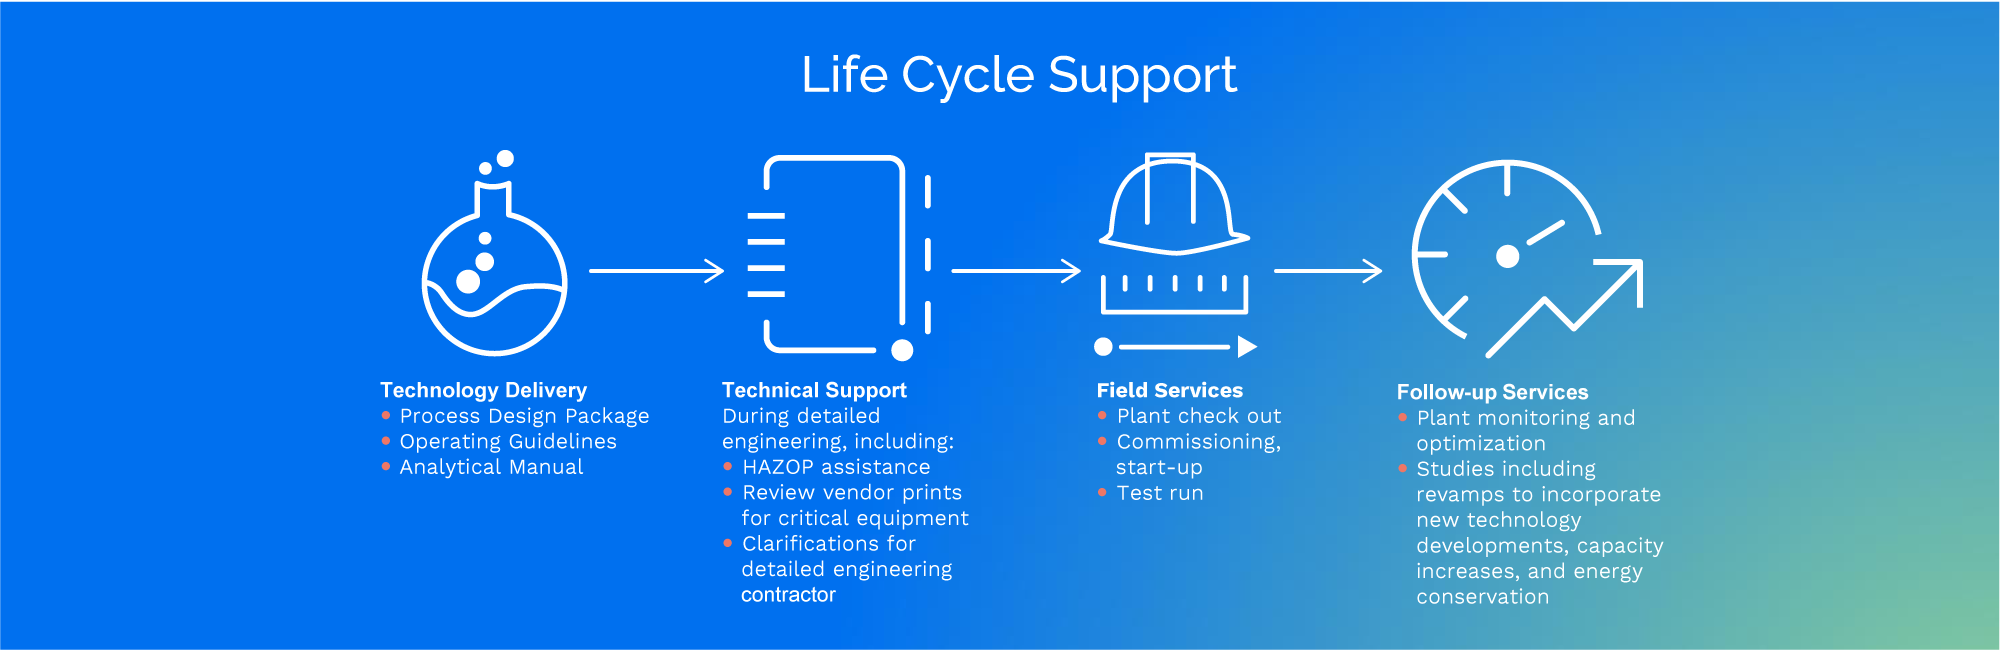 Life cycle support